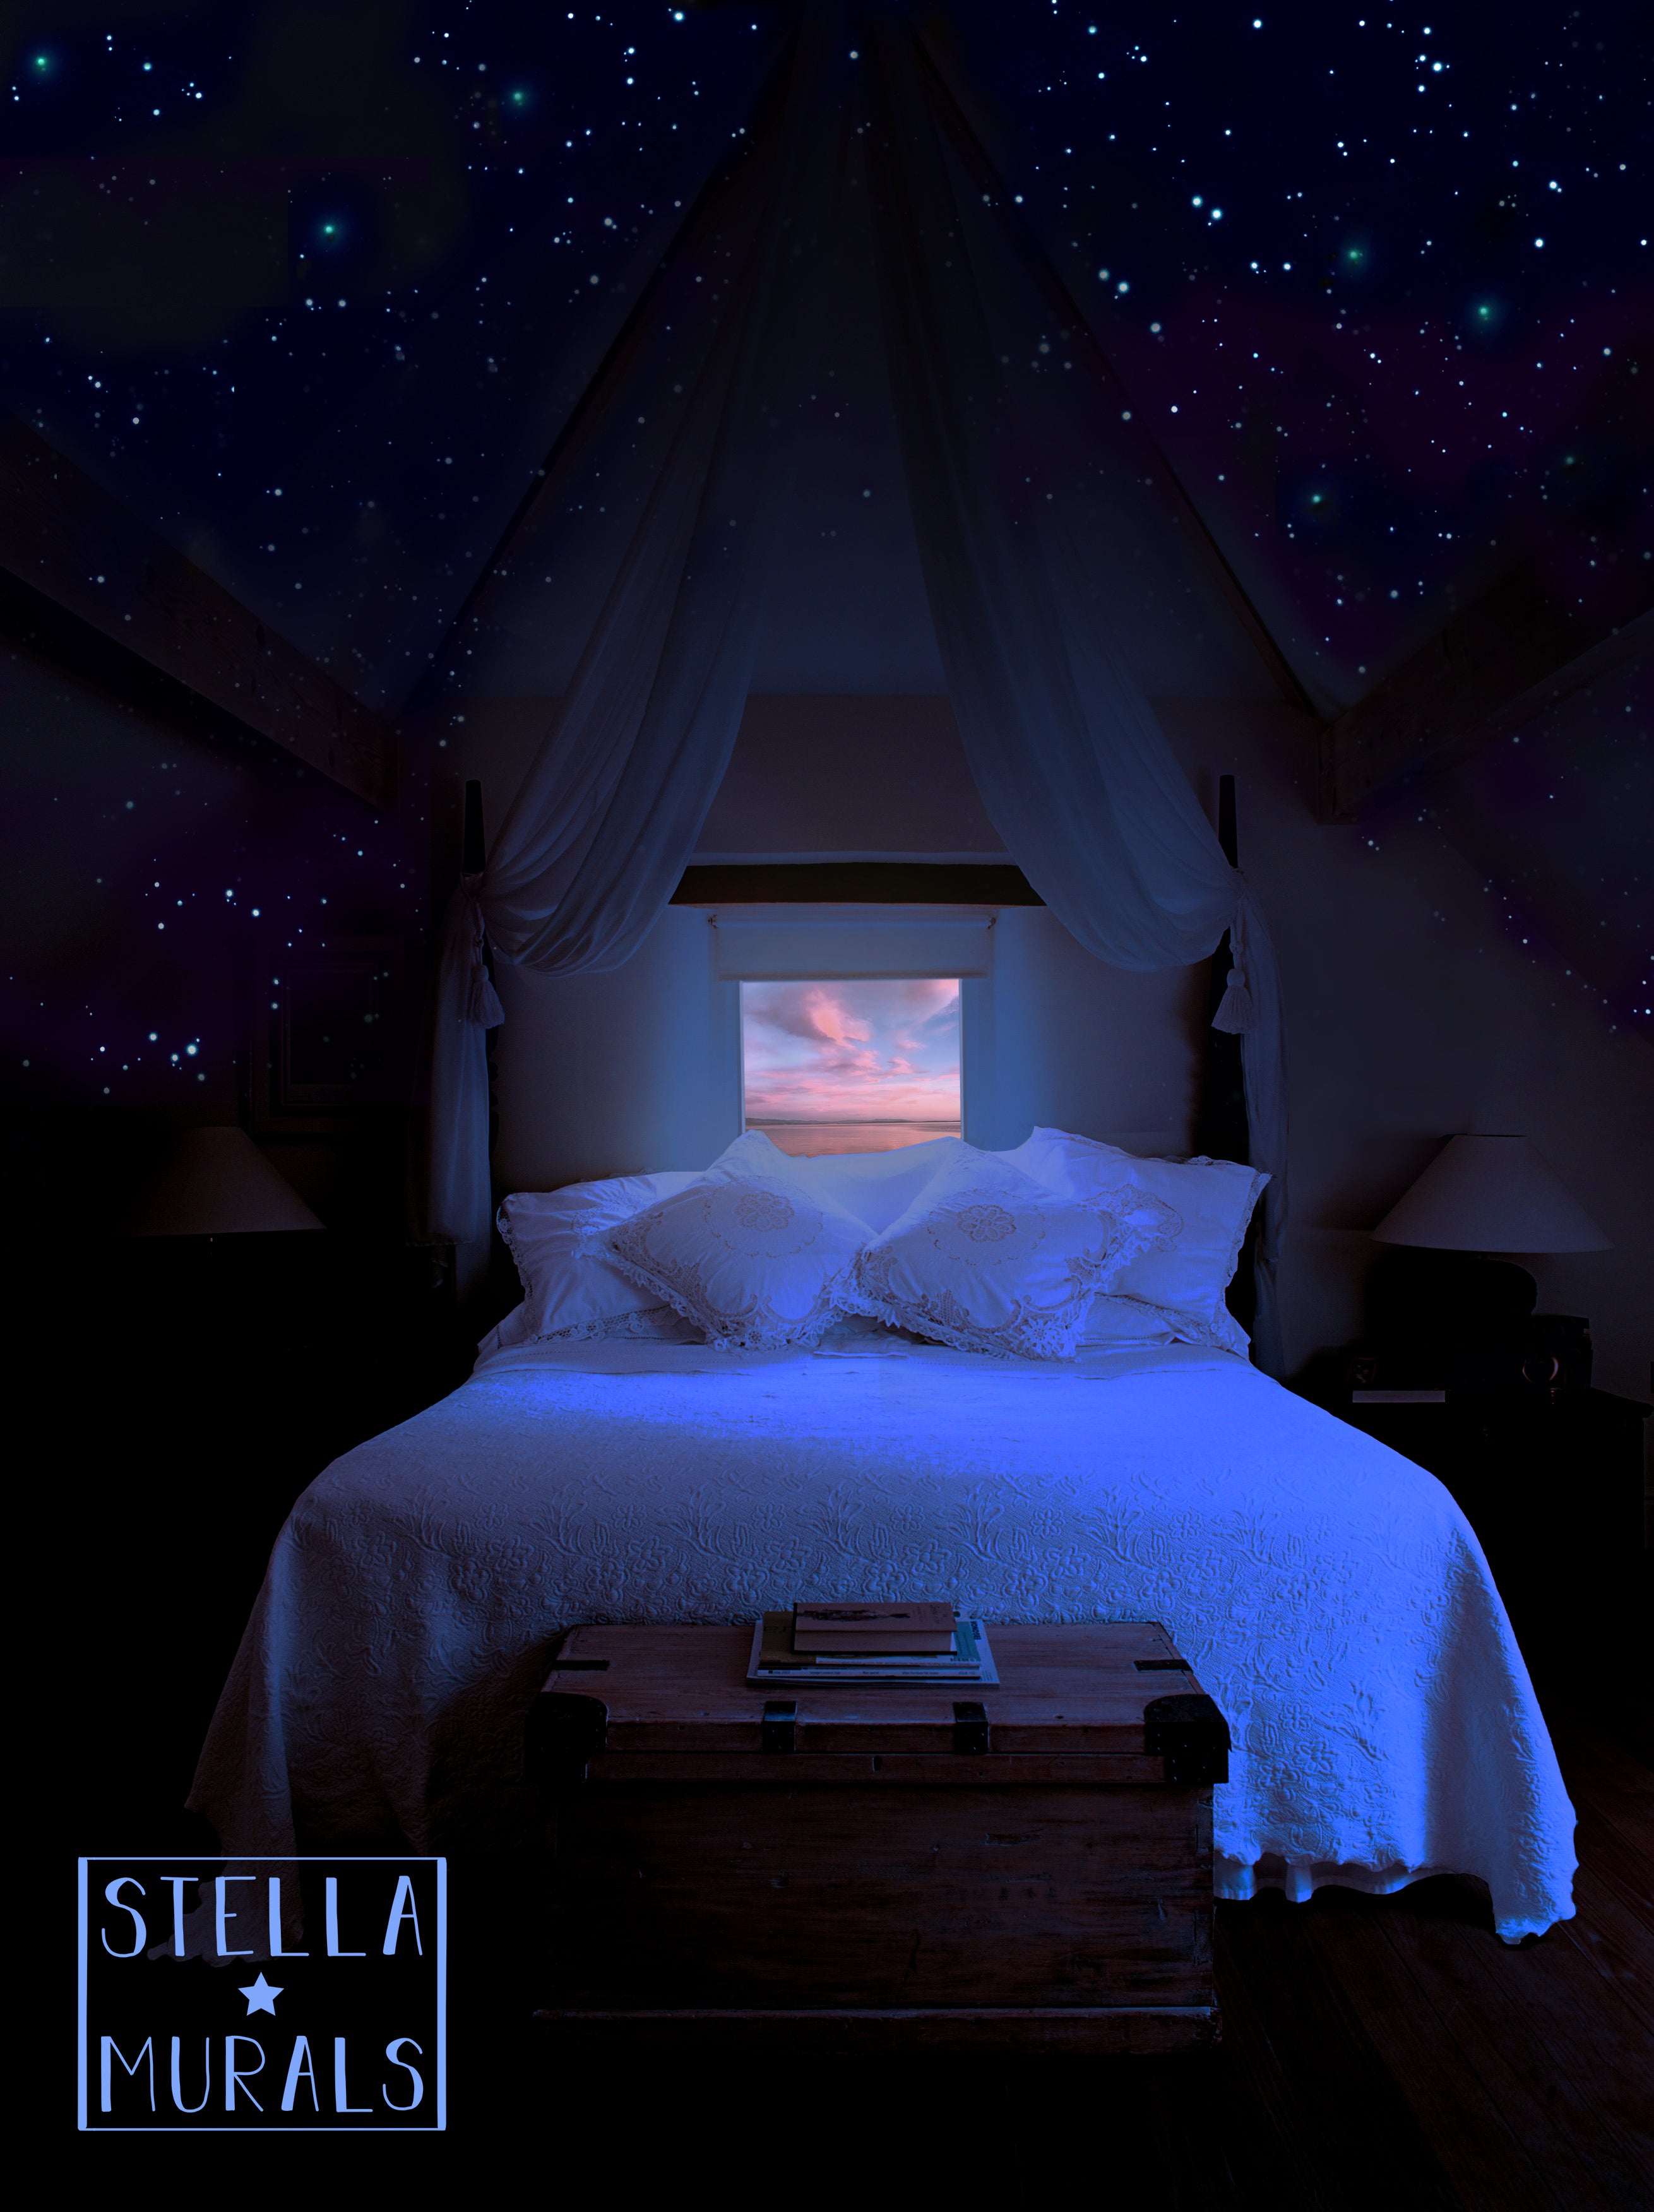 Stella Murals glow in the dark stickers and murals for airbnb guest room. Luxury bedroom with night sky home decor. 